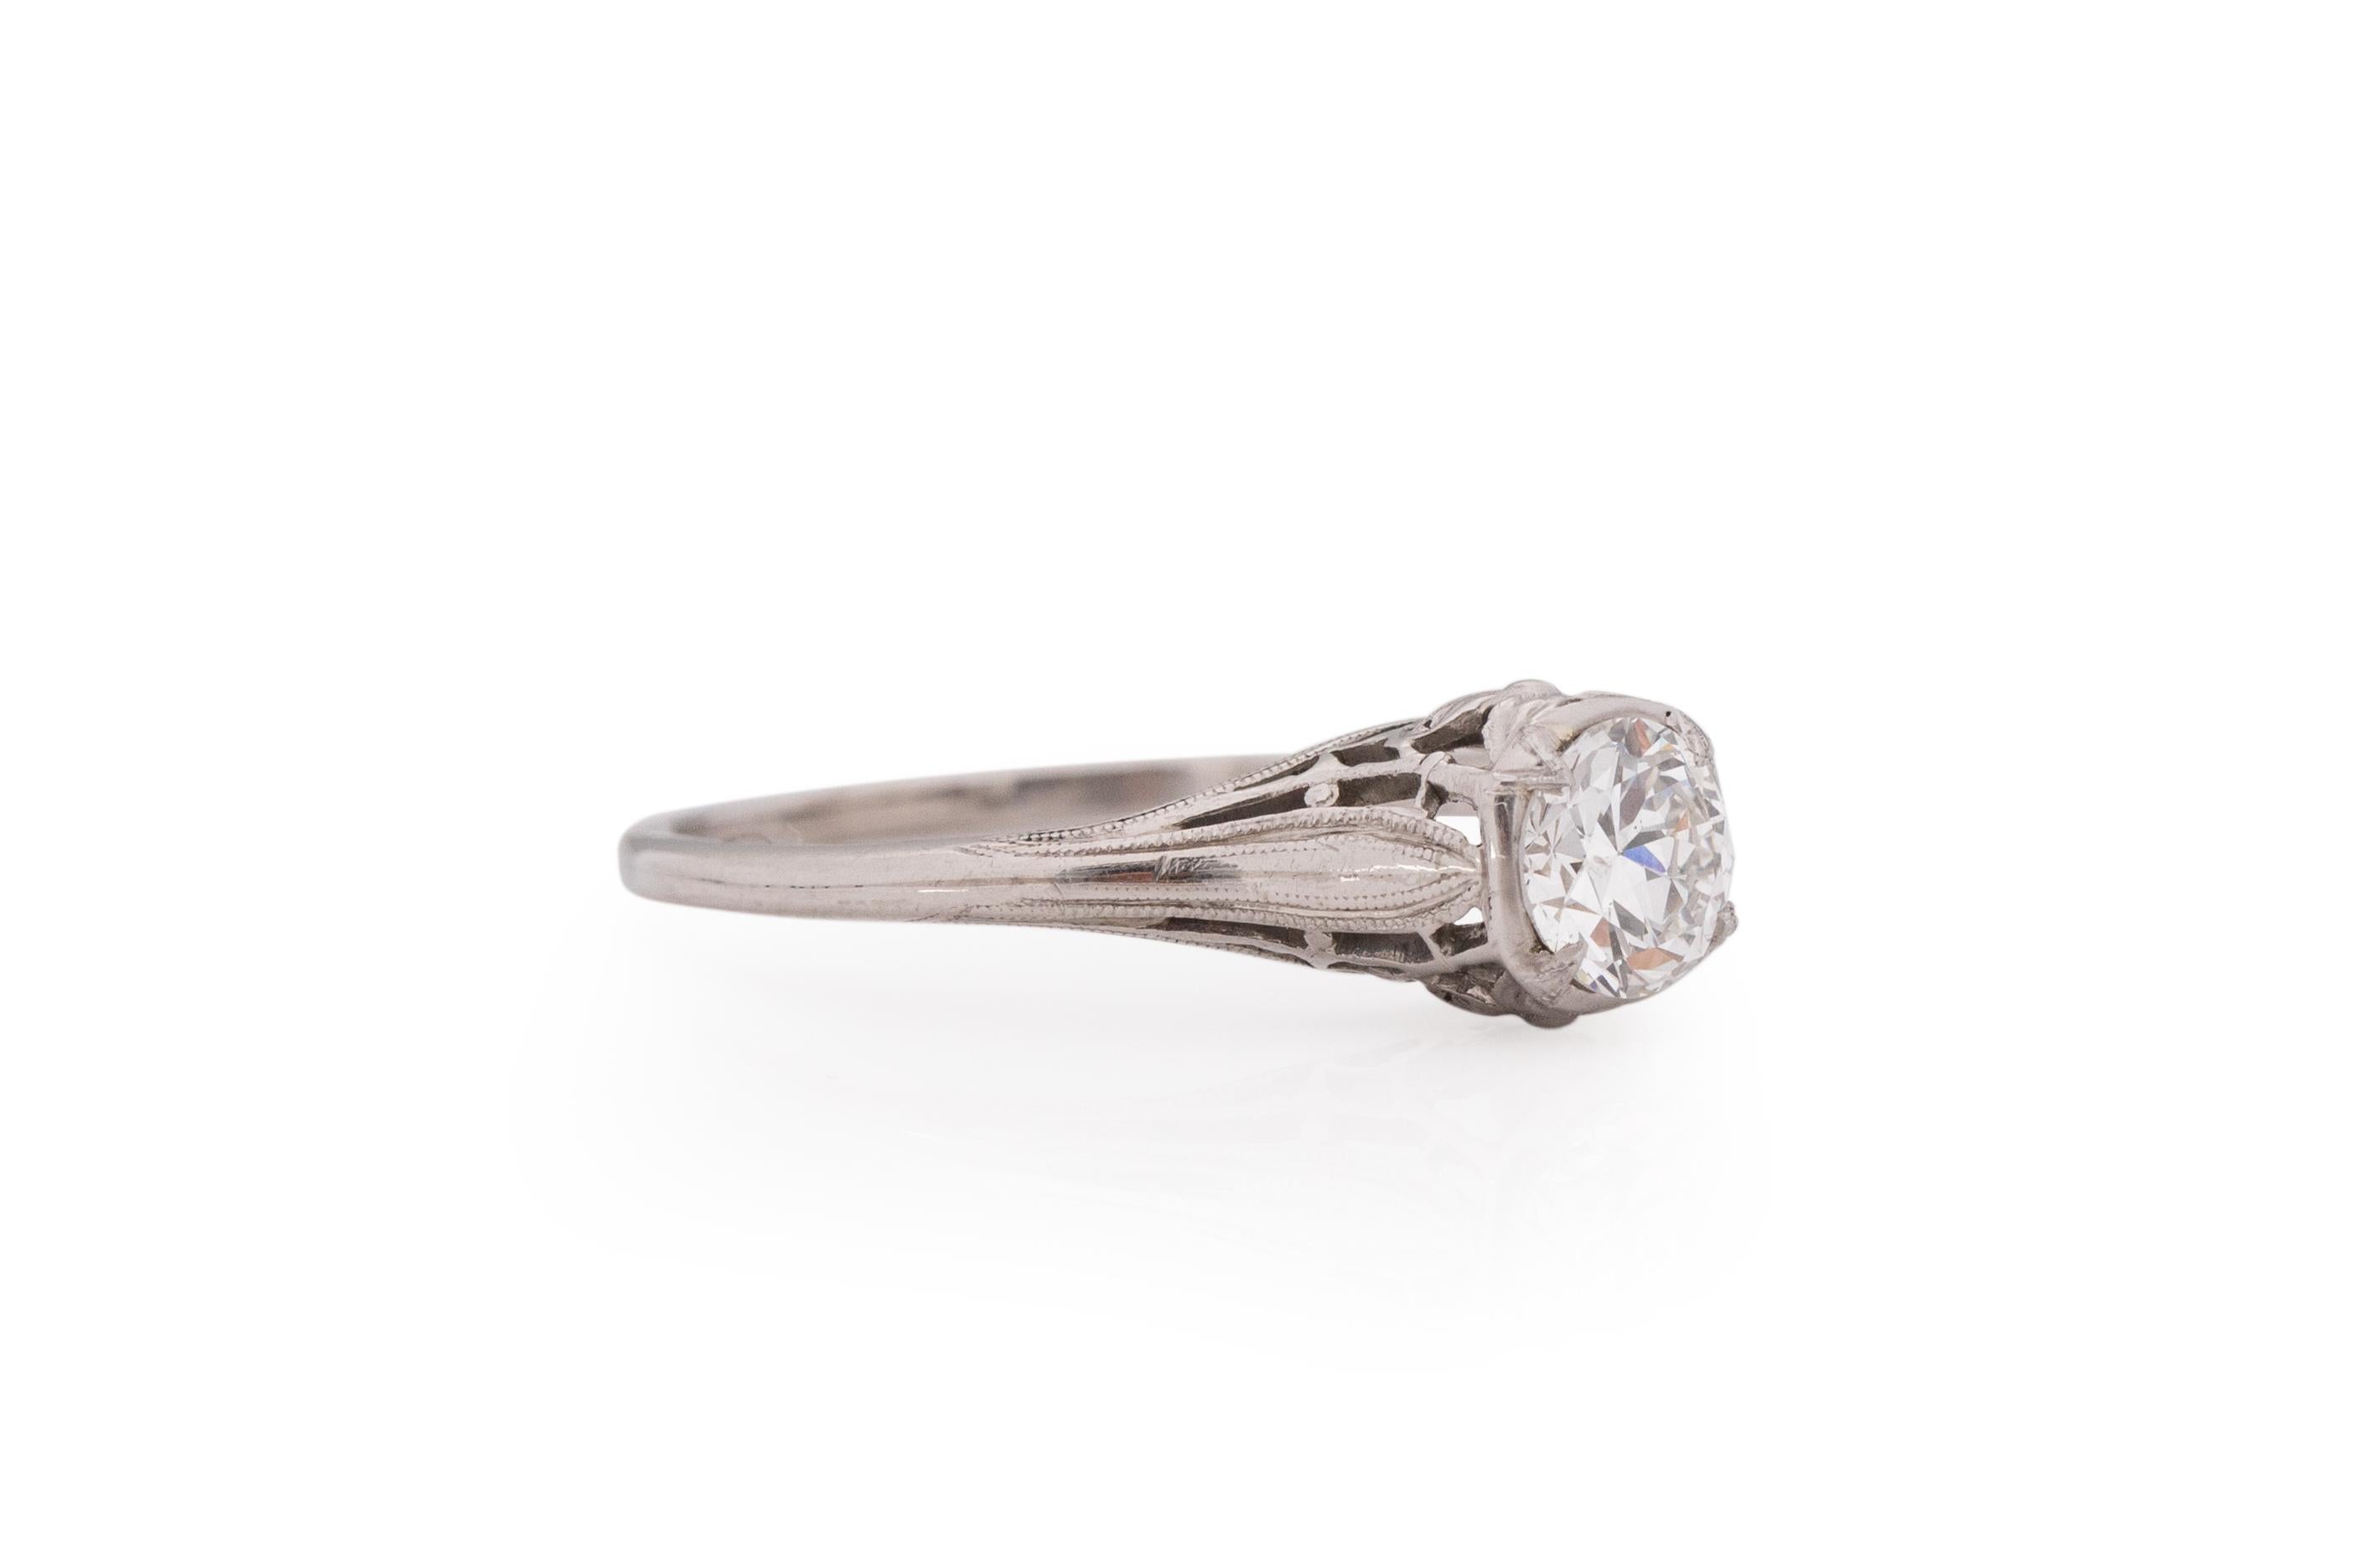 Ring Size: 8.25
Metal Type: Platinum [Hallmarked, and Tested]
Weight: 3.4 grams

Center Diamond Details:
GIA REPORT #: 2376913565
Weight: .67 carat
Cut: Old European brilliant
Color: G
Clarity: SI2
Measurements: 5.63mm x 5.48 x 3.47mm

Finger to Top